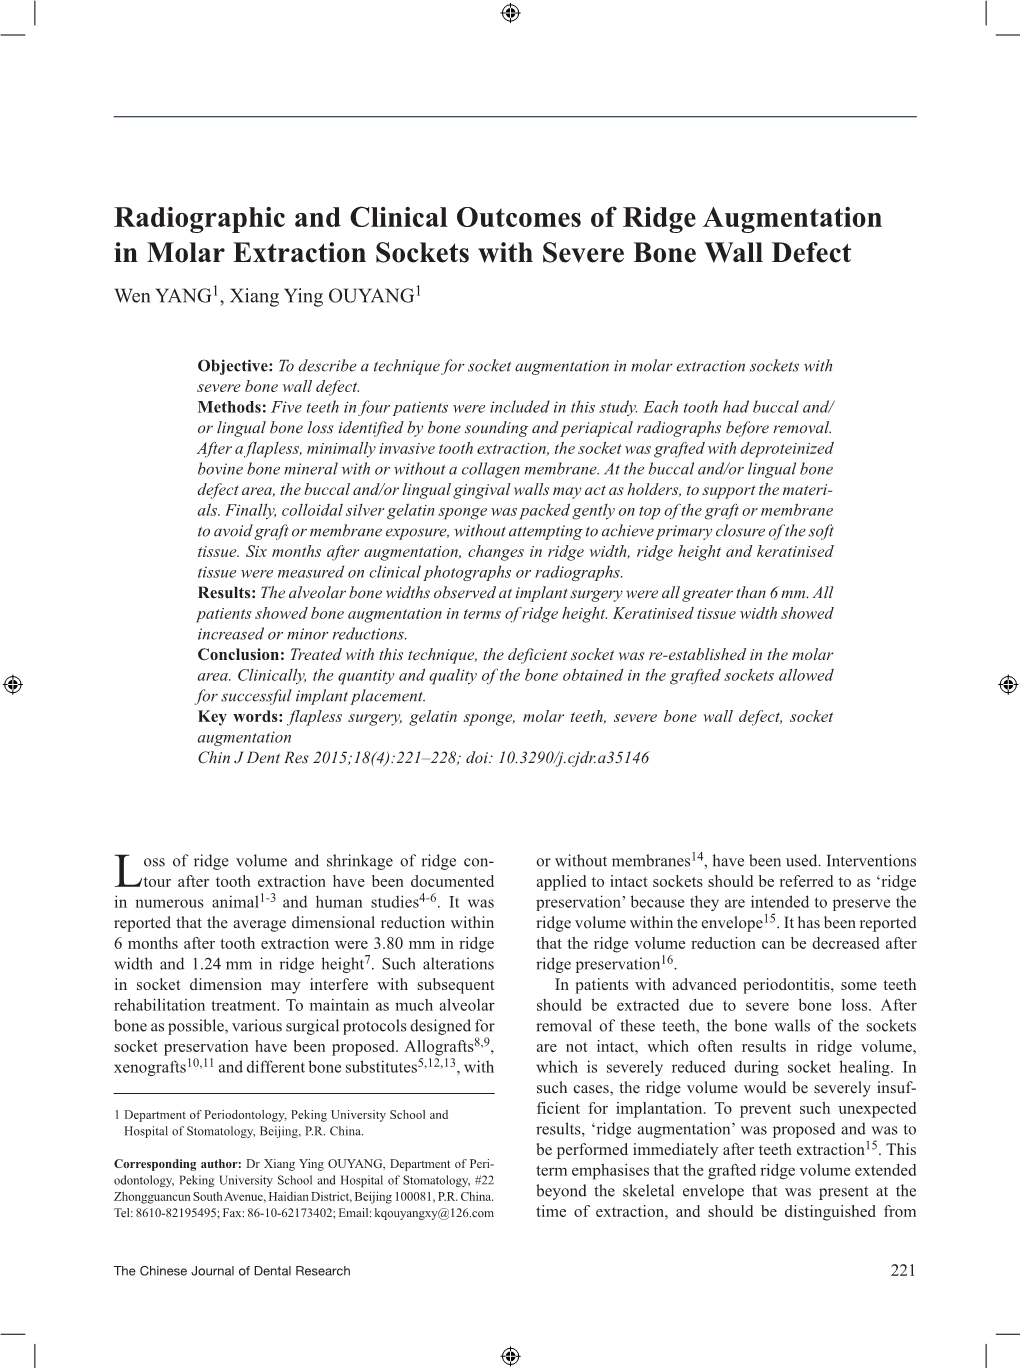 Radiographic and Clinical Outcomes of Ridge Augmentation in Molar Extraction Sockets with Severe Bone Wall Defect Wen YANG1, Xiang Ying OUYANG1